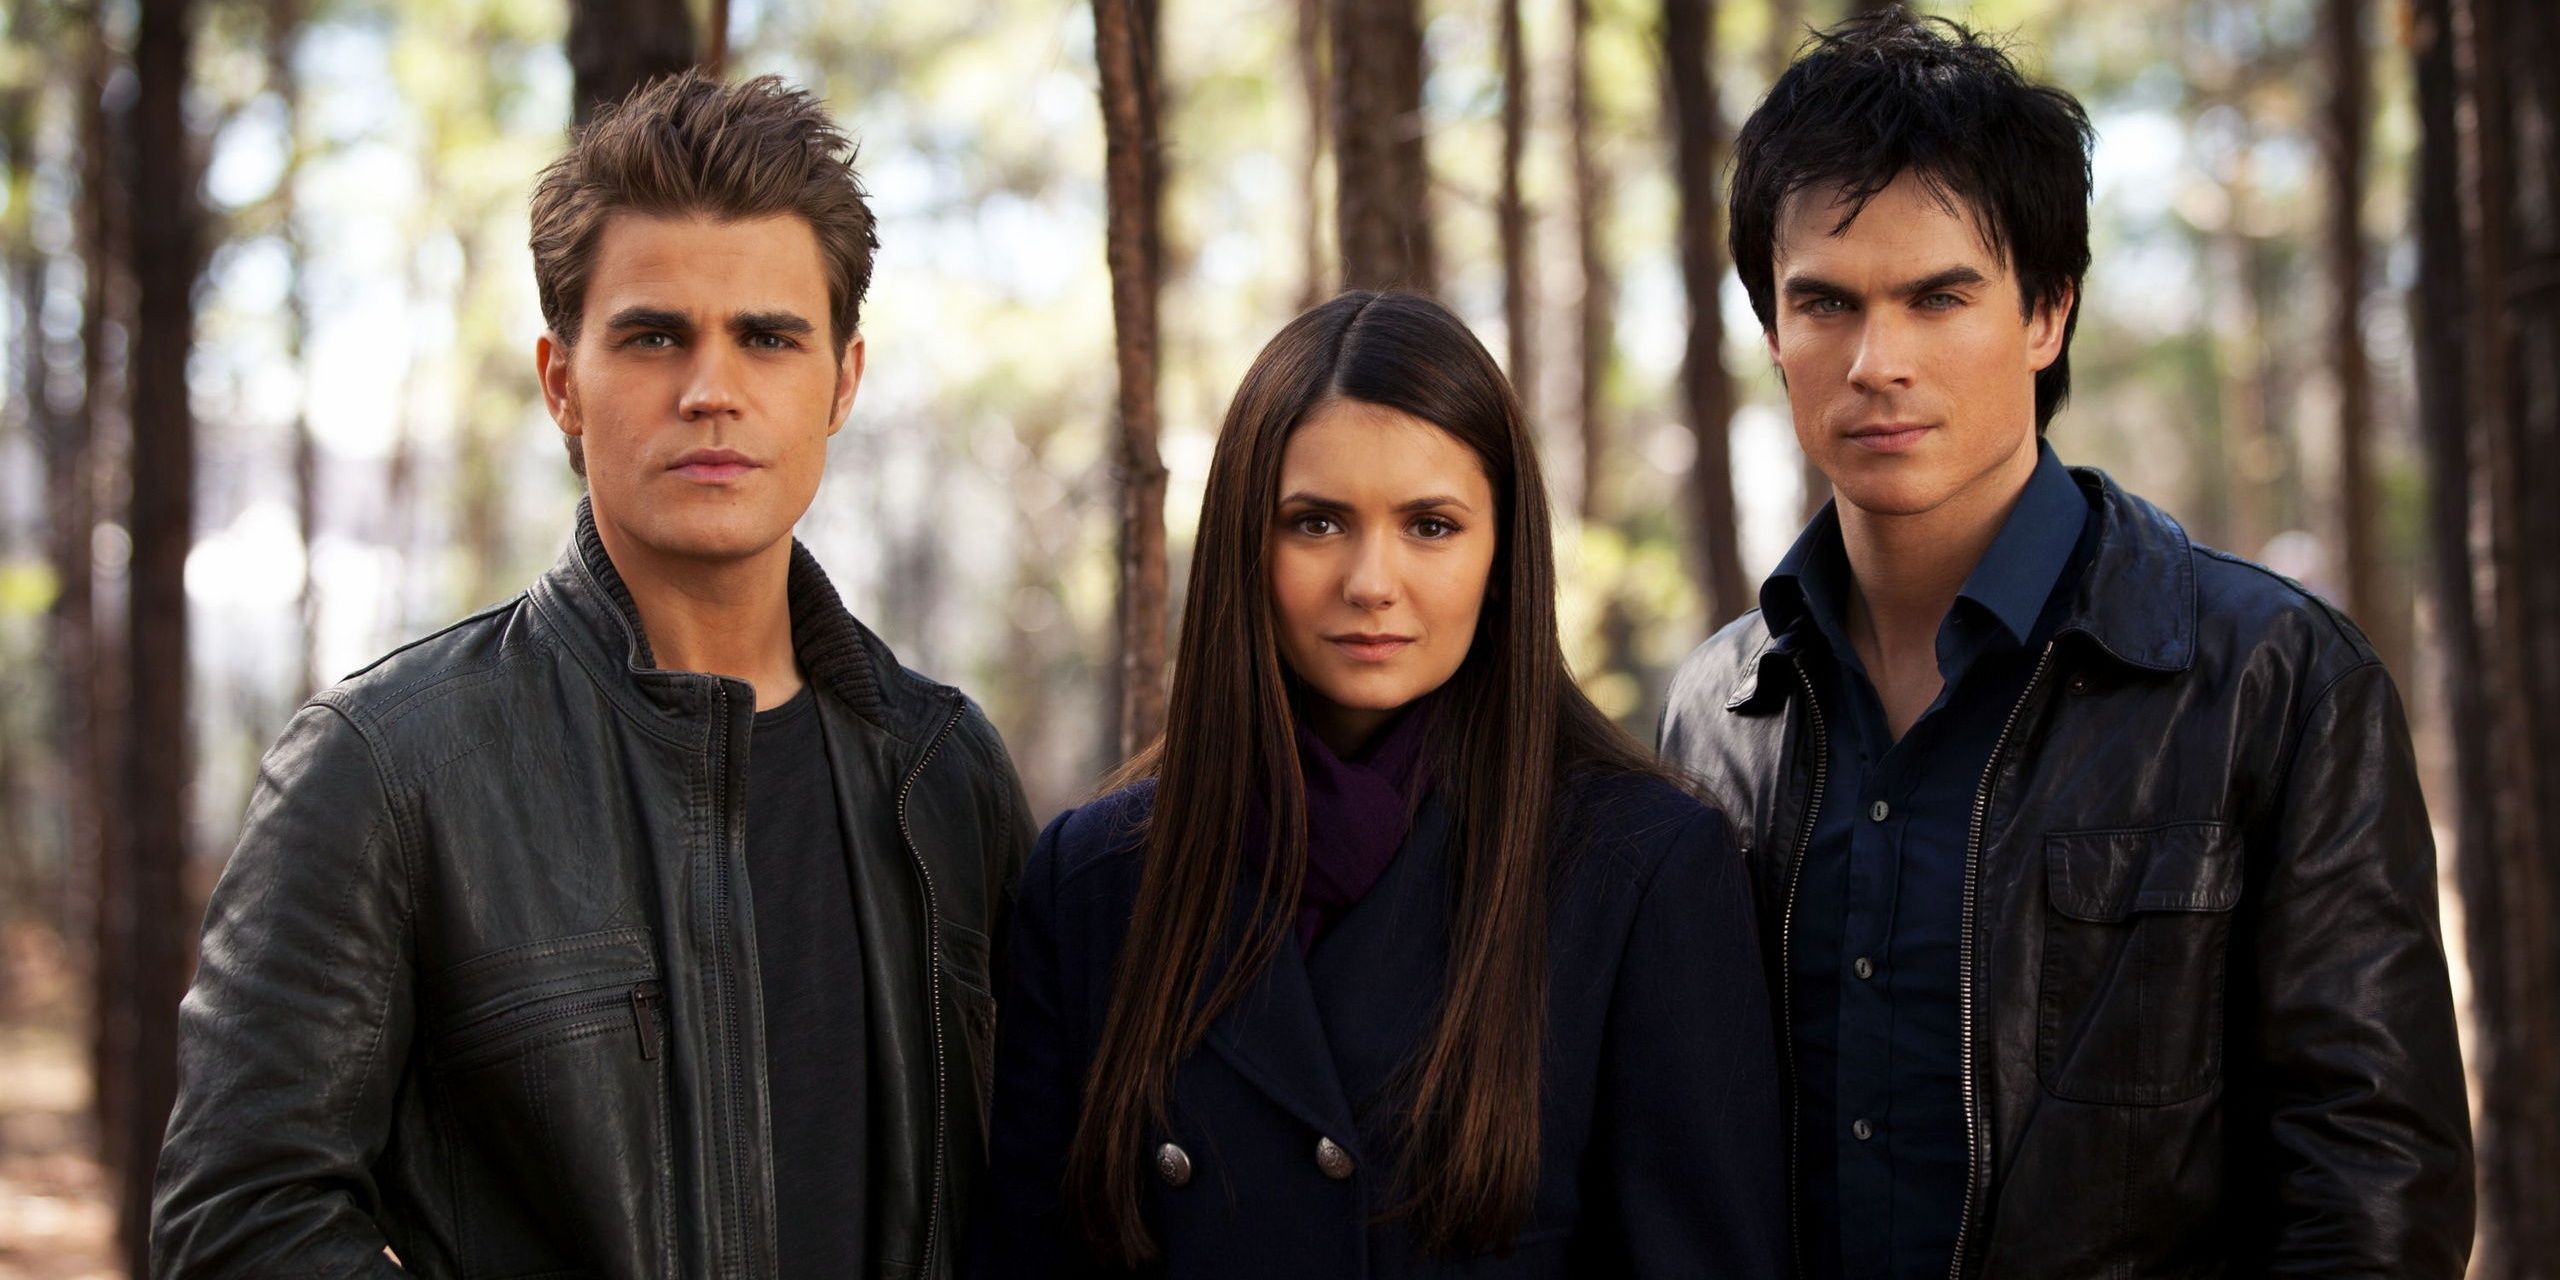 The Vampire Diaries Why Elena Should Have Been With Both Damon & Stefan (& Why She Was Right To Choose)